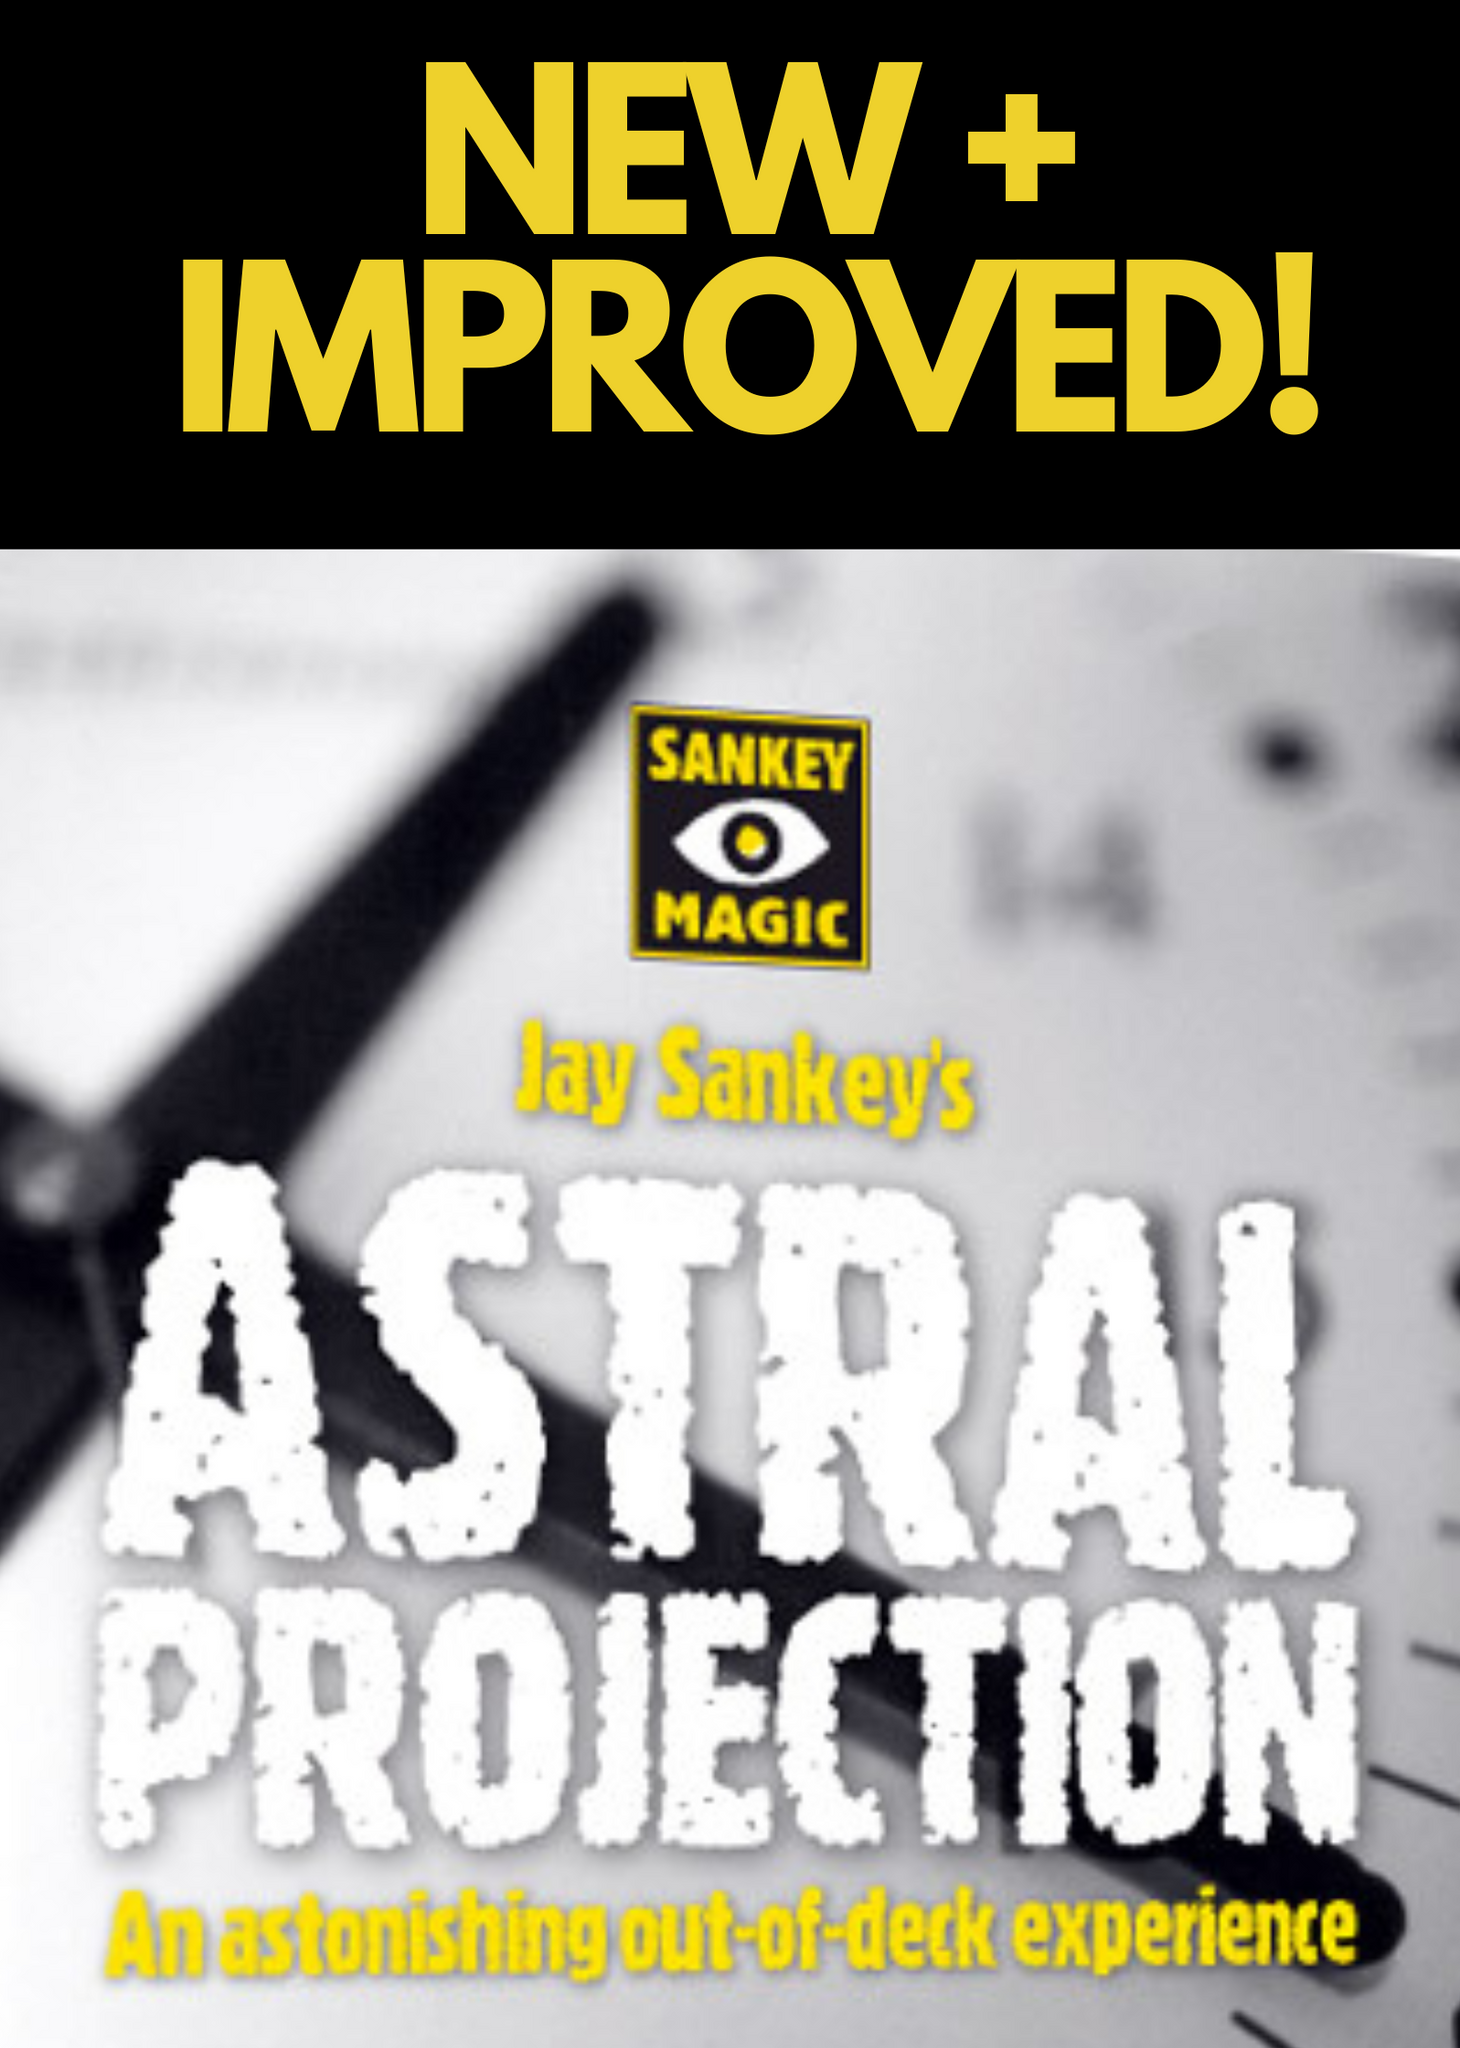 ASTRAL PROJECTION (NEW + IMPROVED!)